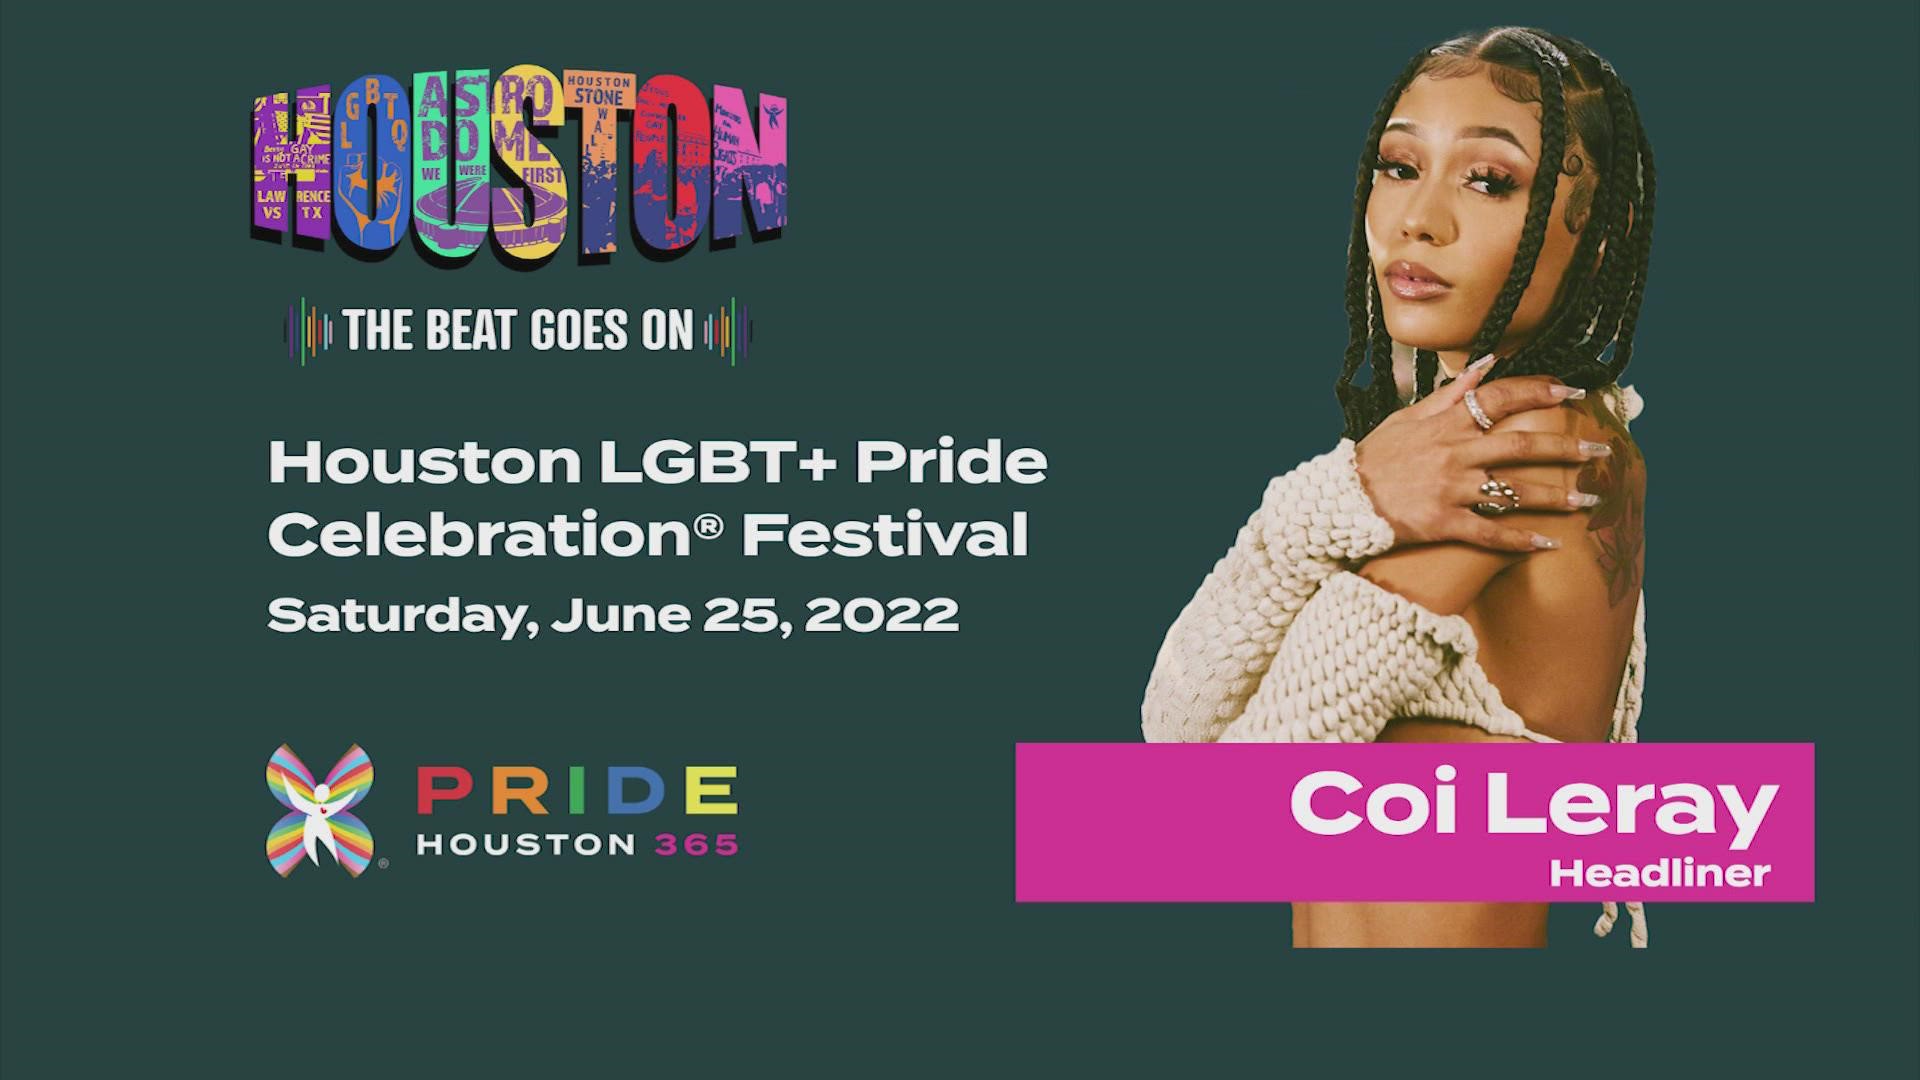 The festival kicks off at 1 p.m. on June 25 at Houston's City Hall. The parade will happen immediately after, starting at 7 p.m.